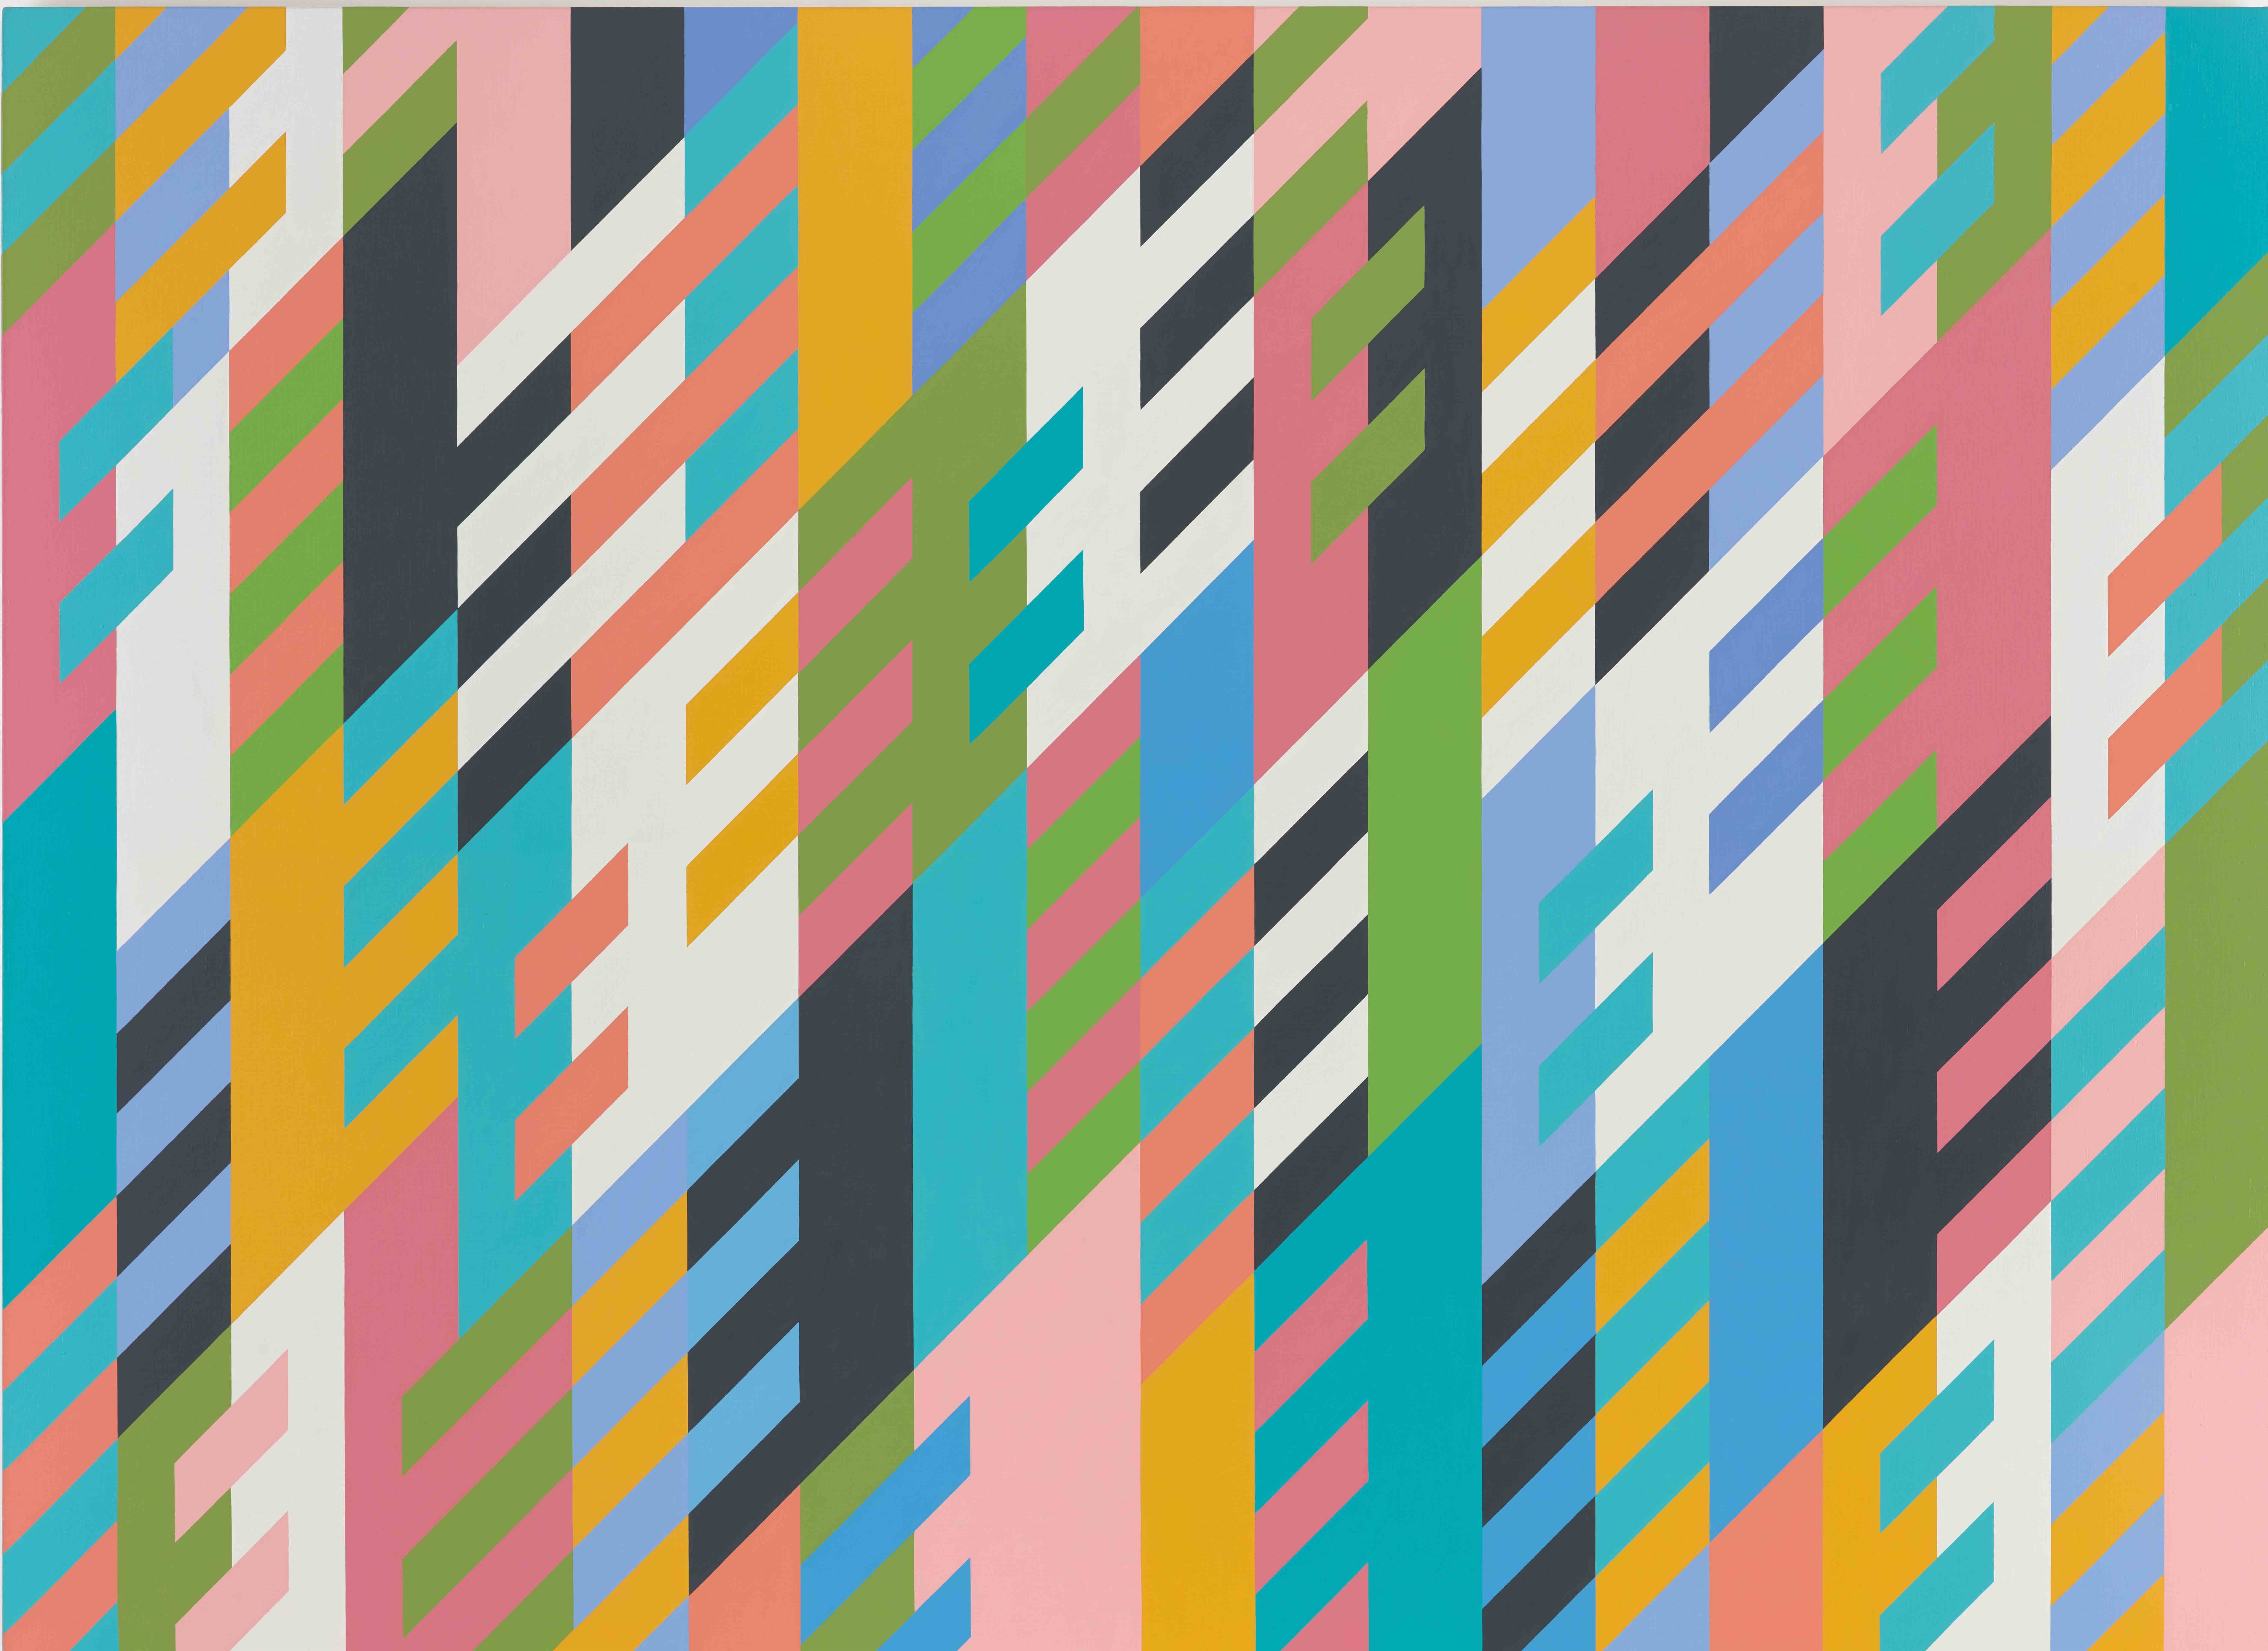 Bridget Riley, ‘New Day,’ 1988 oil on canvas. Bridget Riley Collection © 2022 Bridget Riley, All rights reserved 